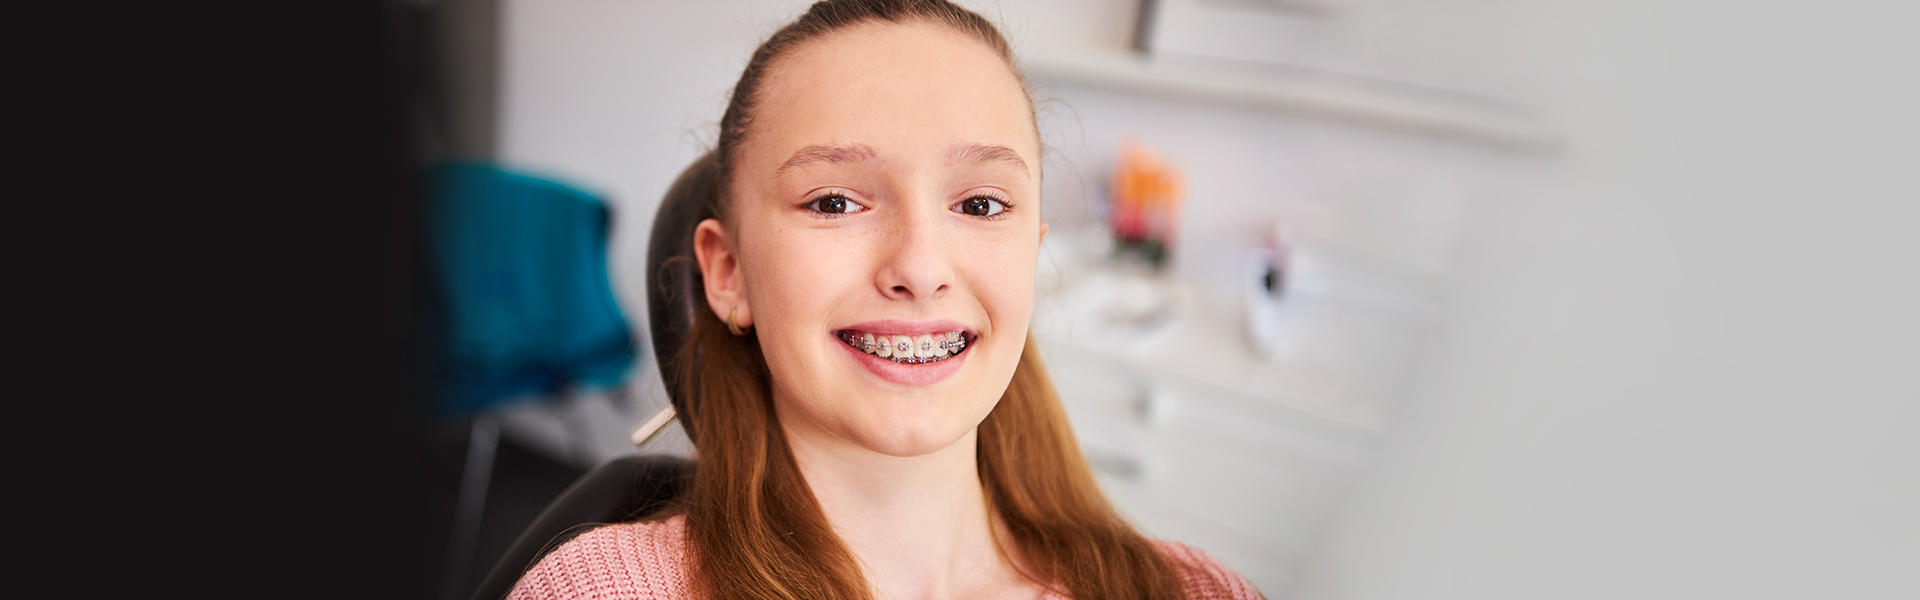 5 Reasons You Should Get Your Child Braces After Christmas